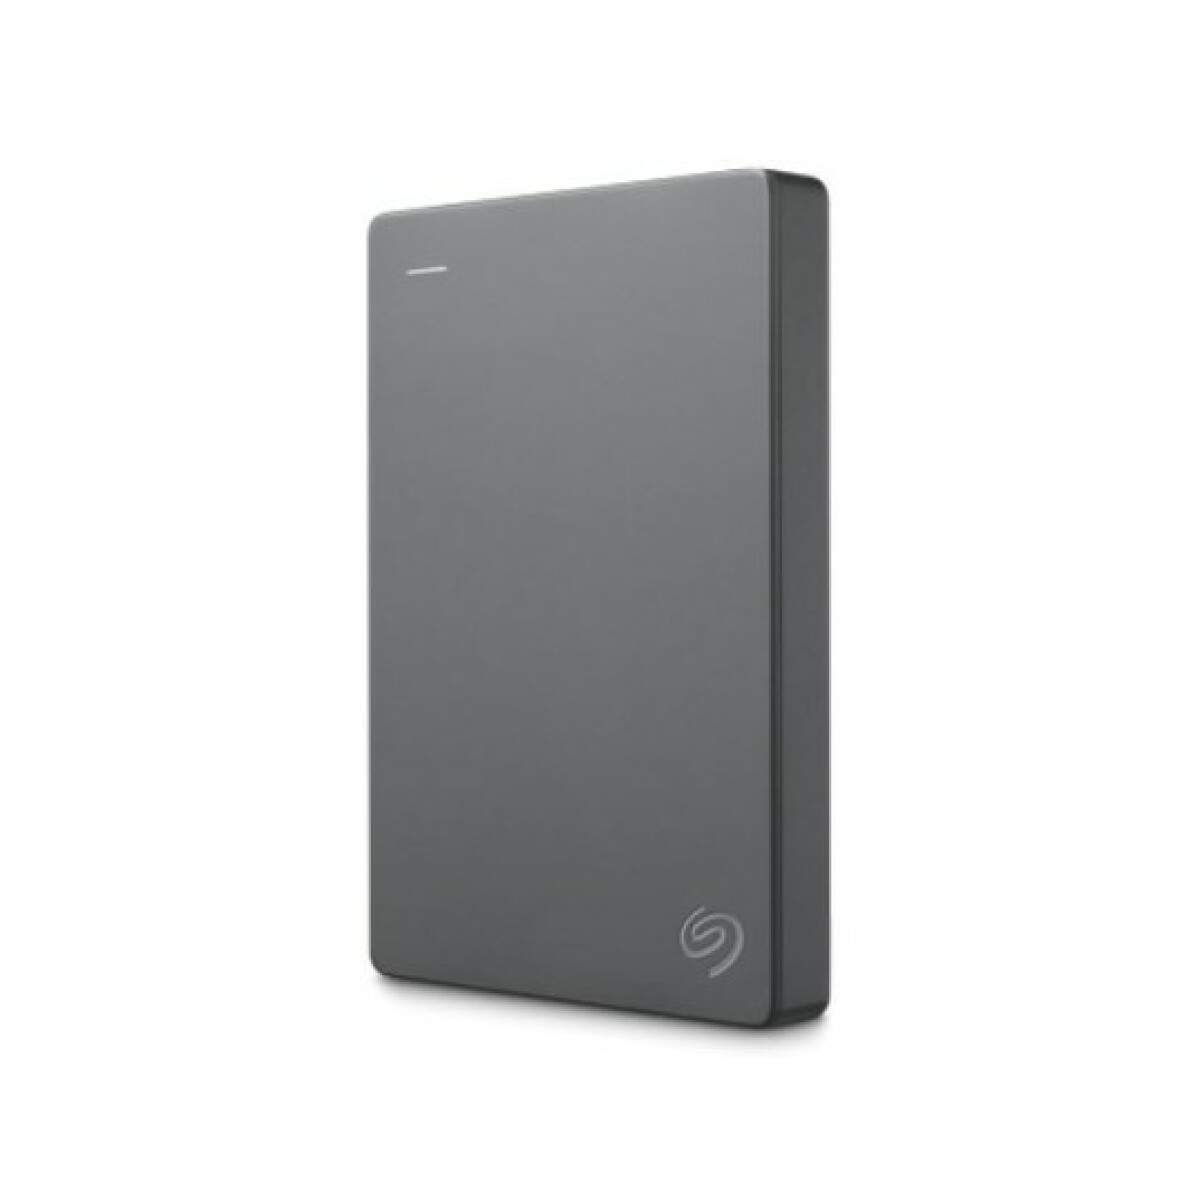 Disque externe Seagate Basic 1 To/2,5"/USB 3.0 Seagate